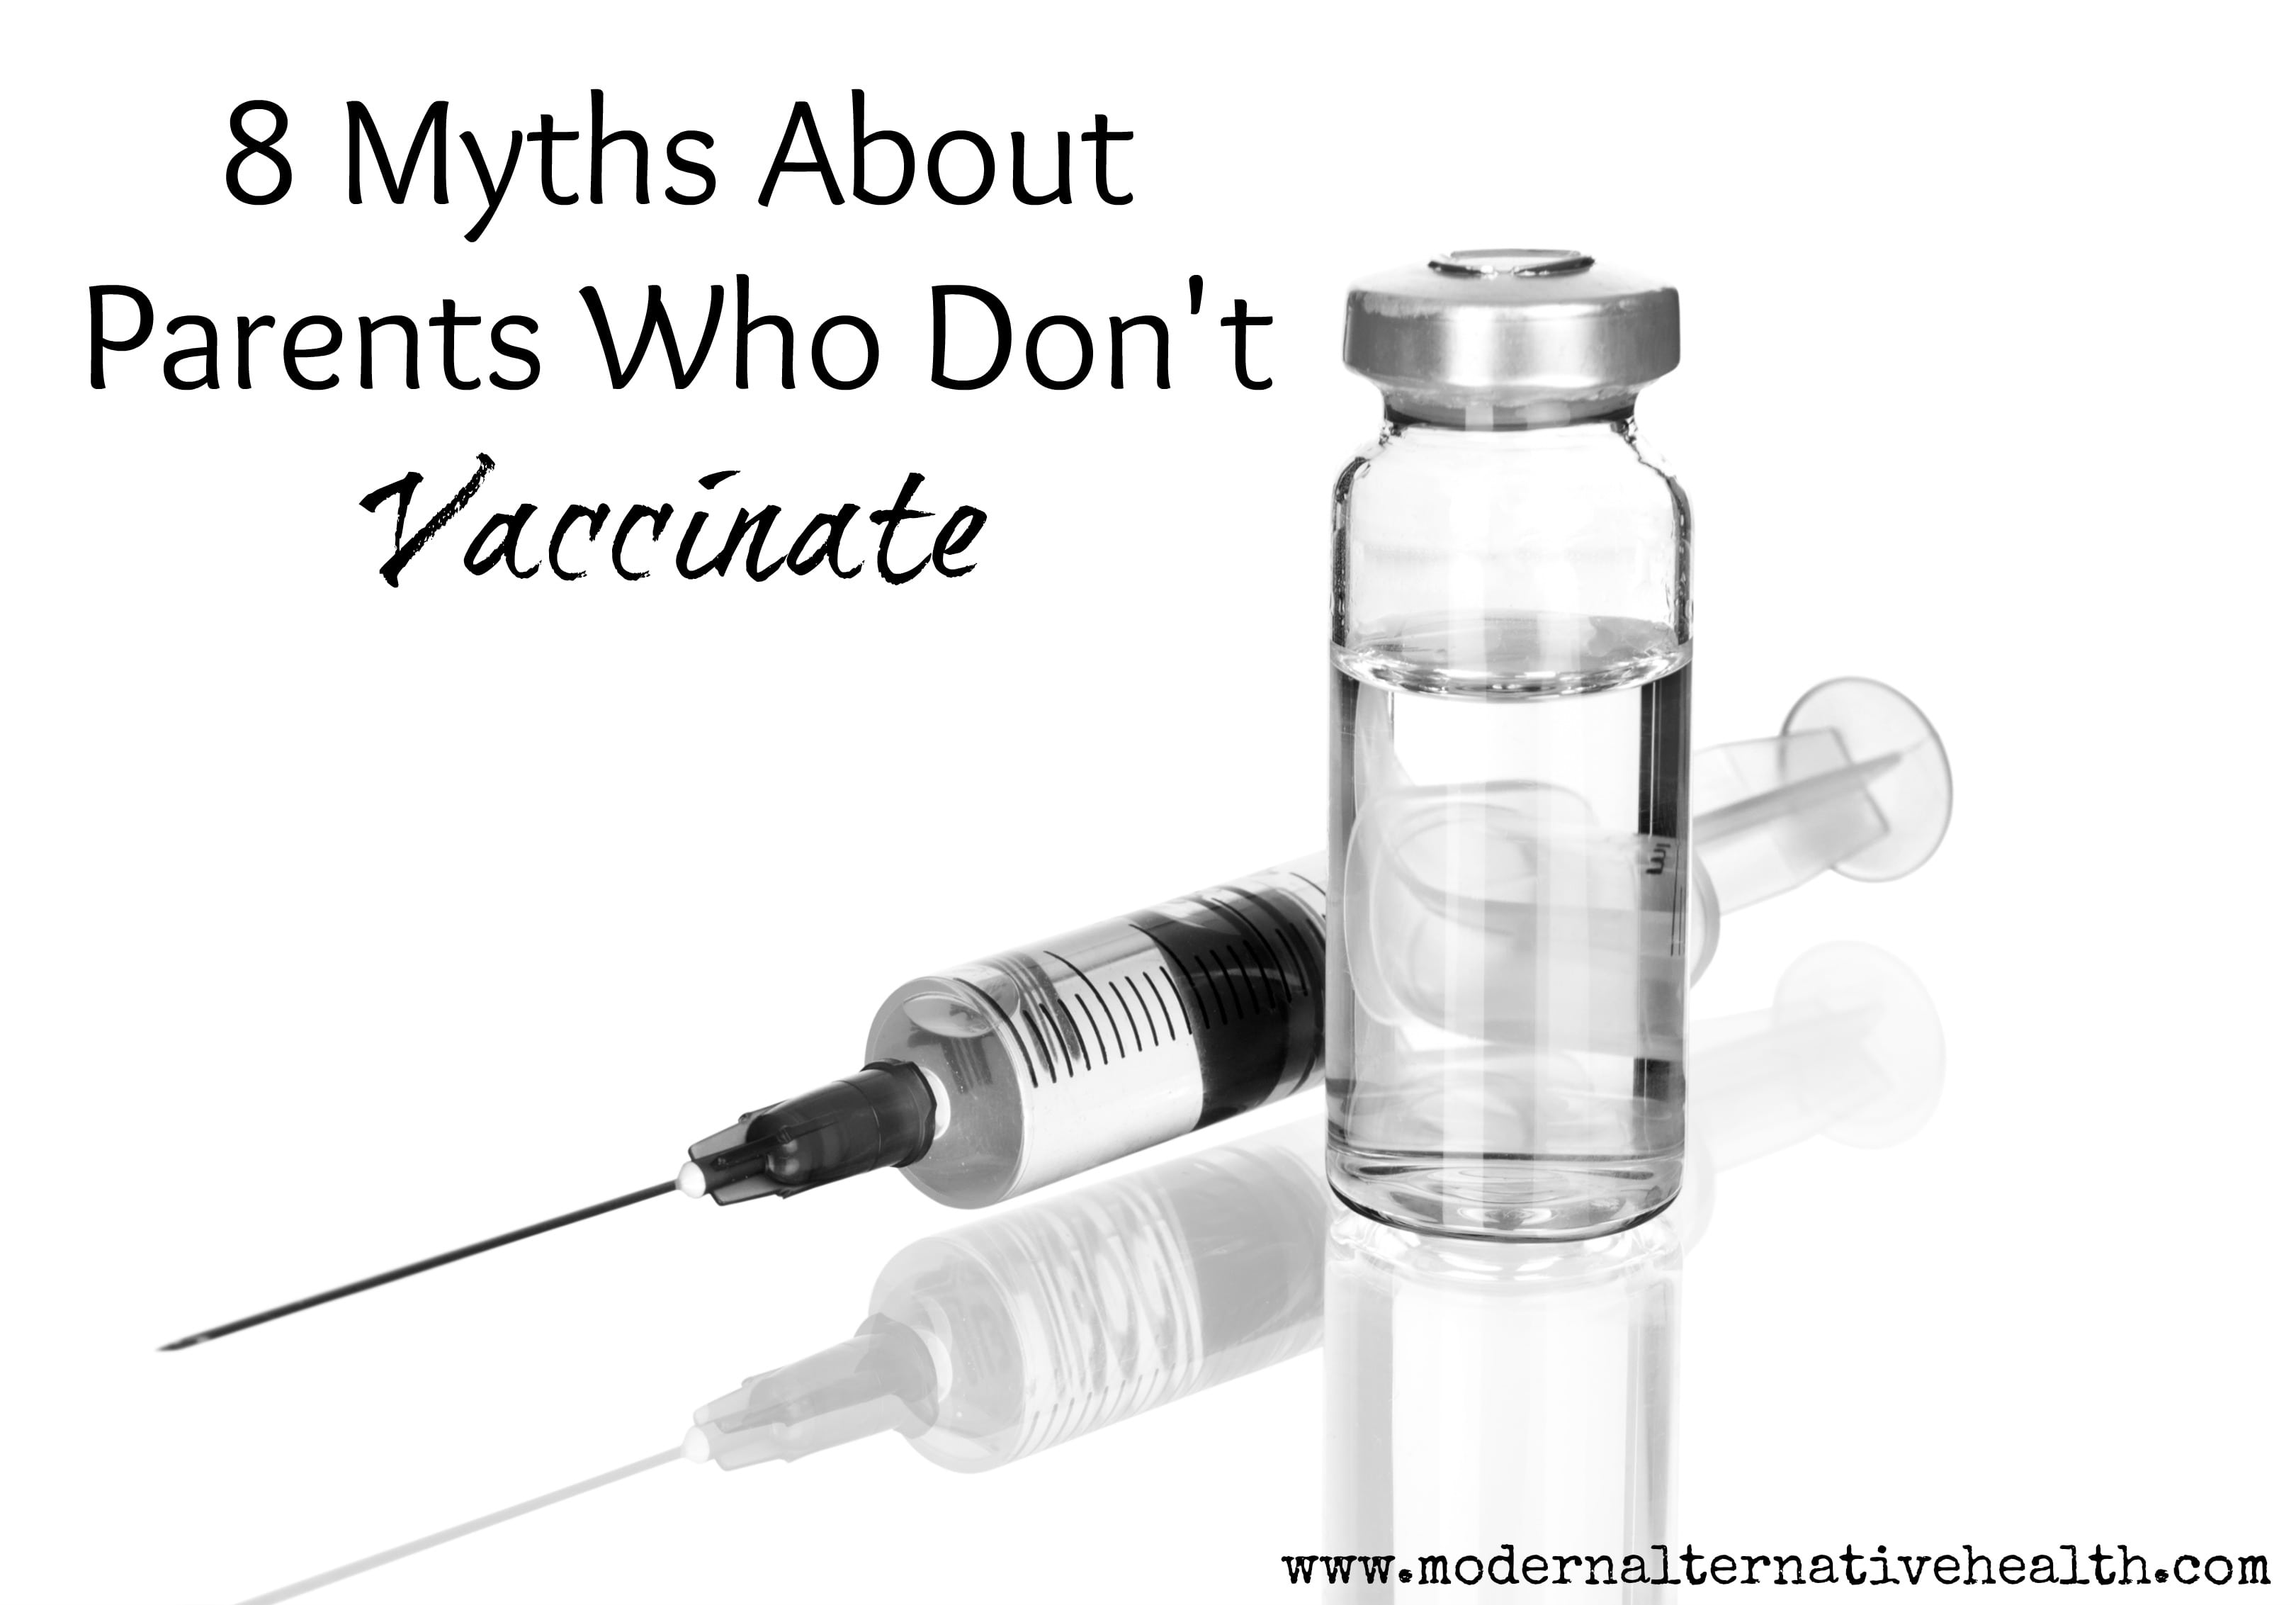 8 Myths About Parents Who Don't Vaccinate